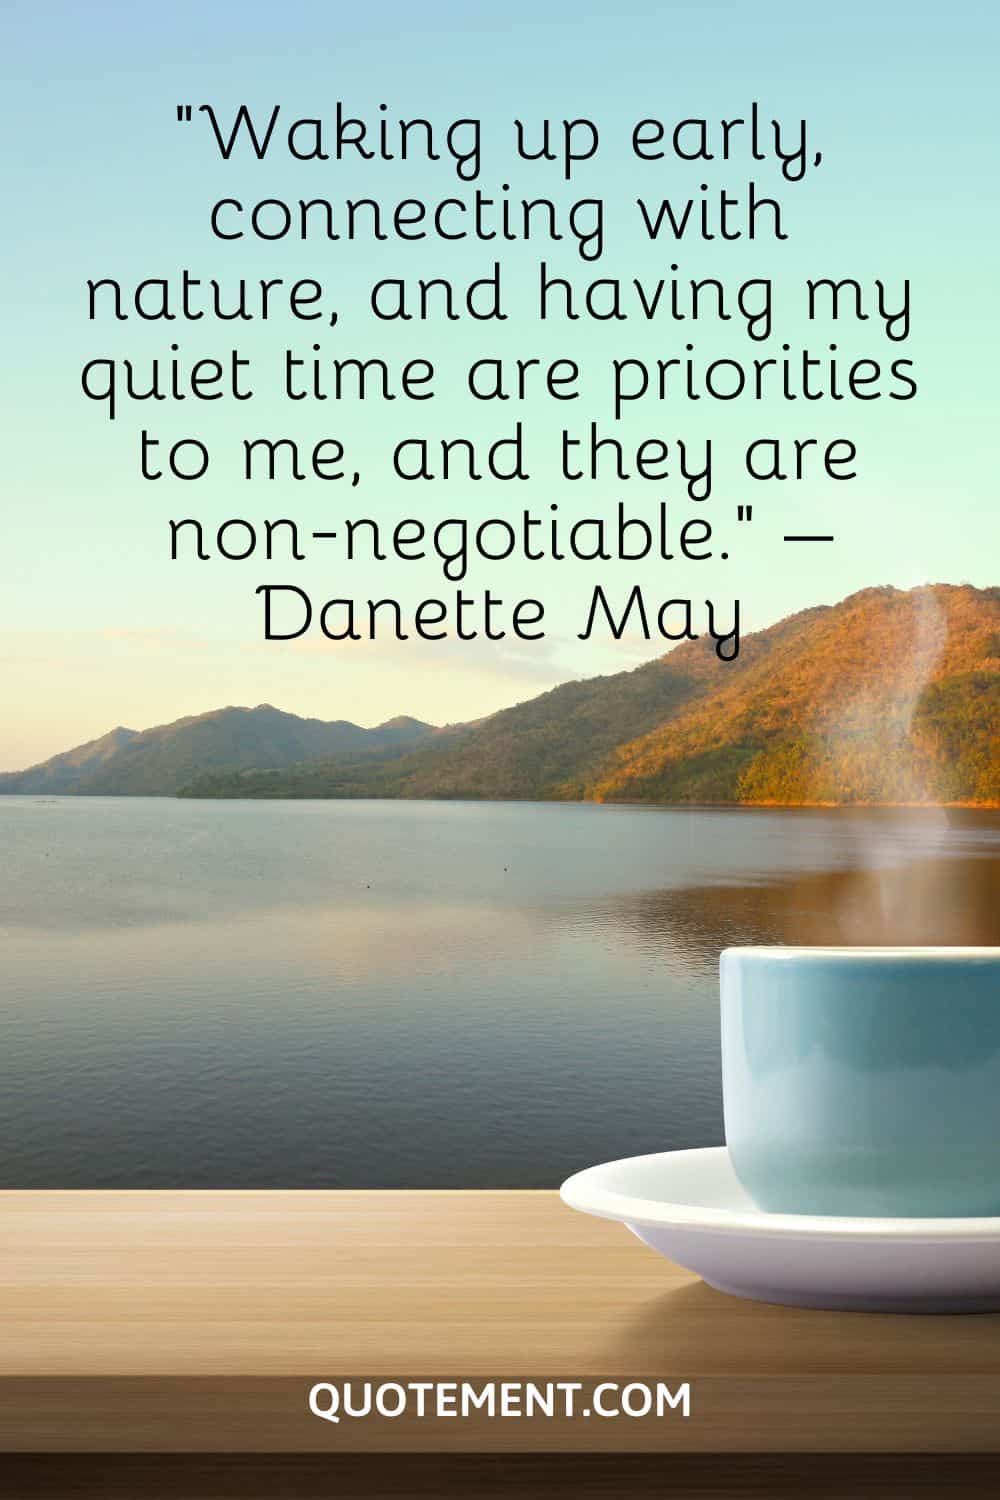 Waking up early, connecting with nature, and having my quiet time are priorities to me, and they are non-negotiable